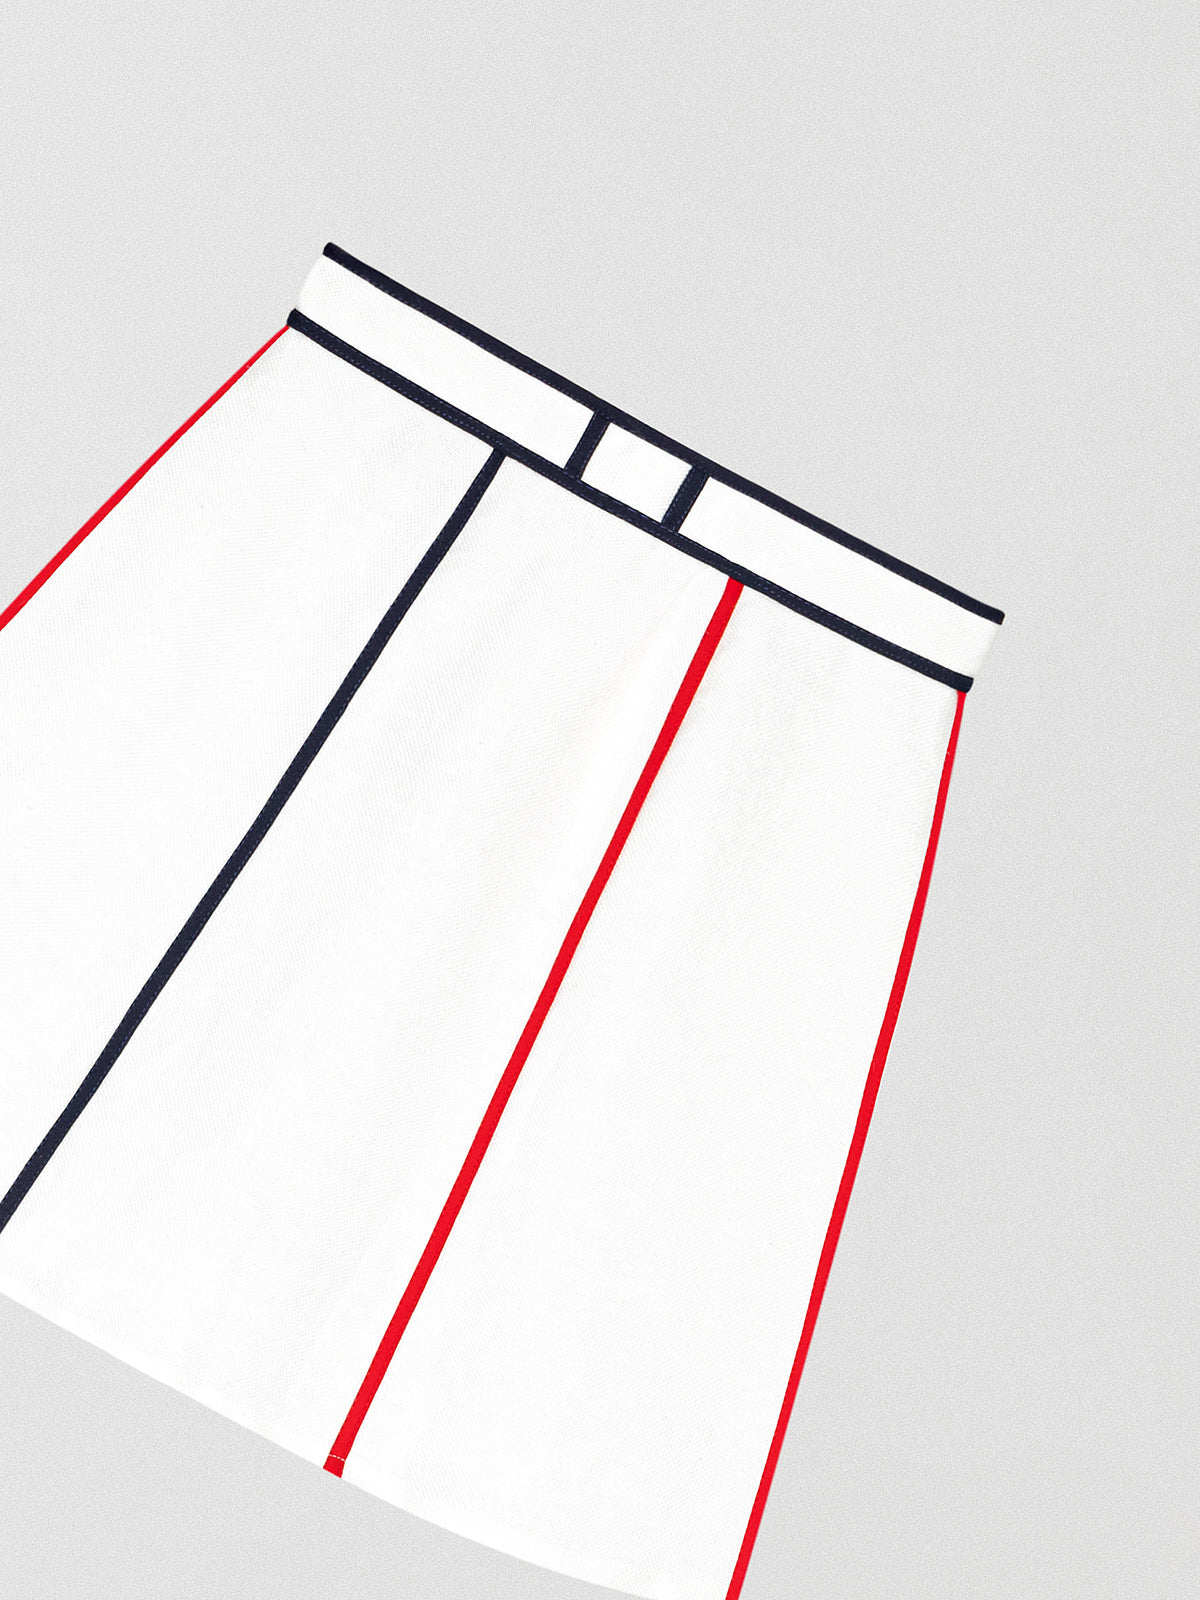 Flared linen white mini skirt with details in red and navy.